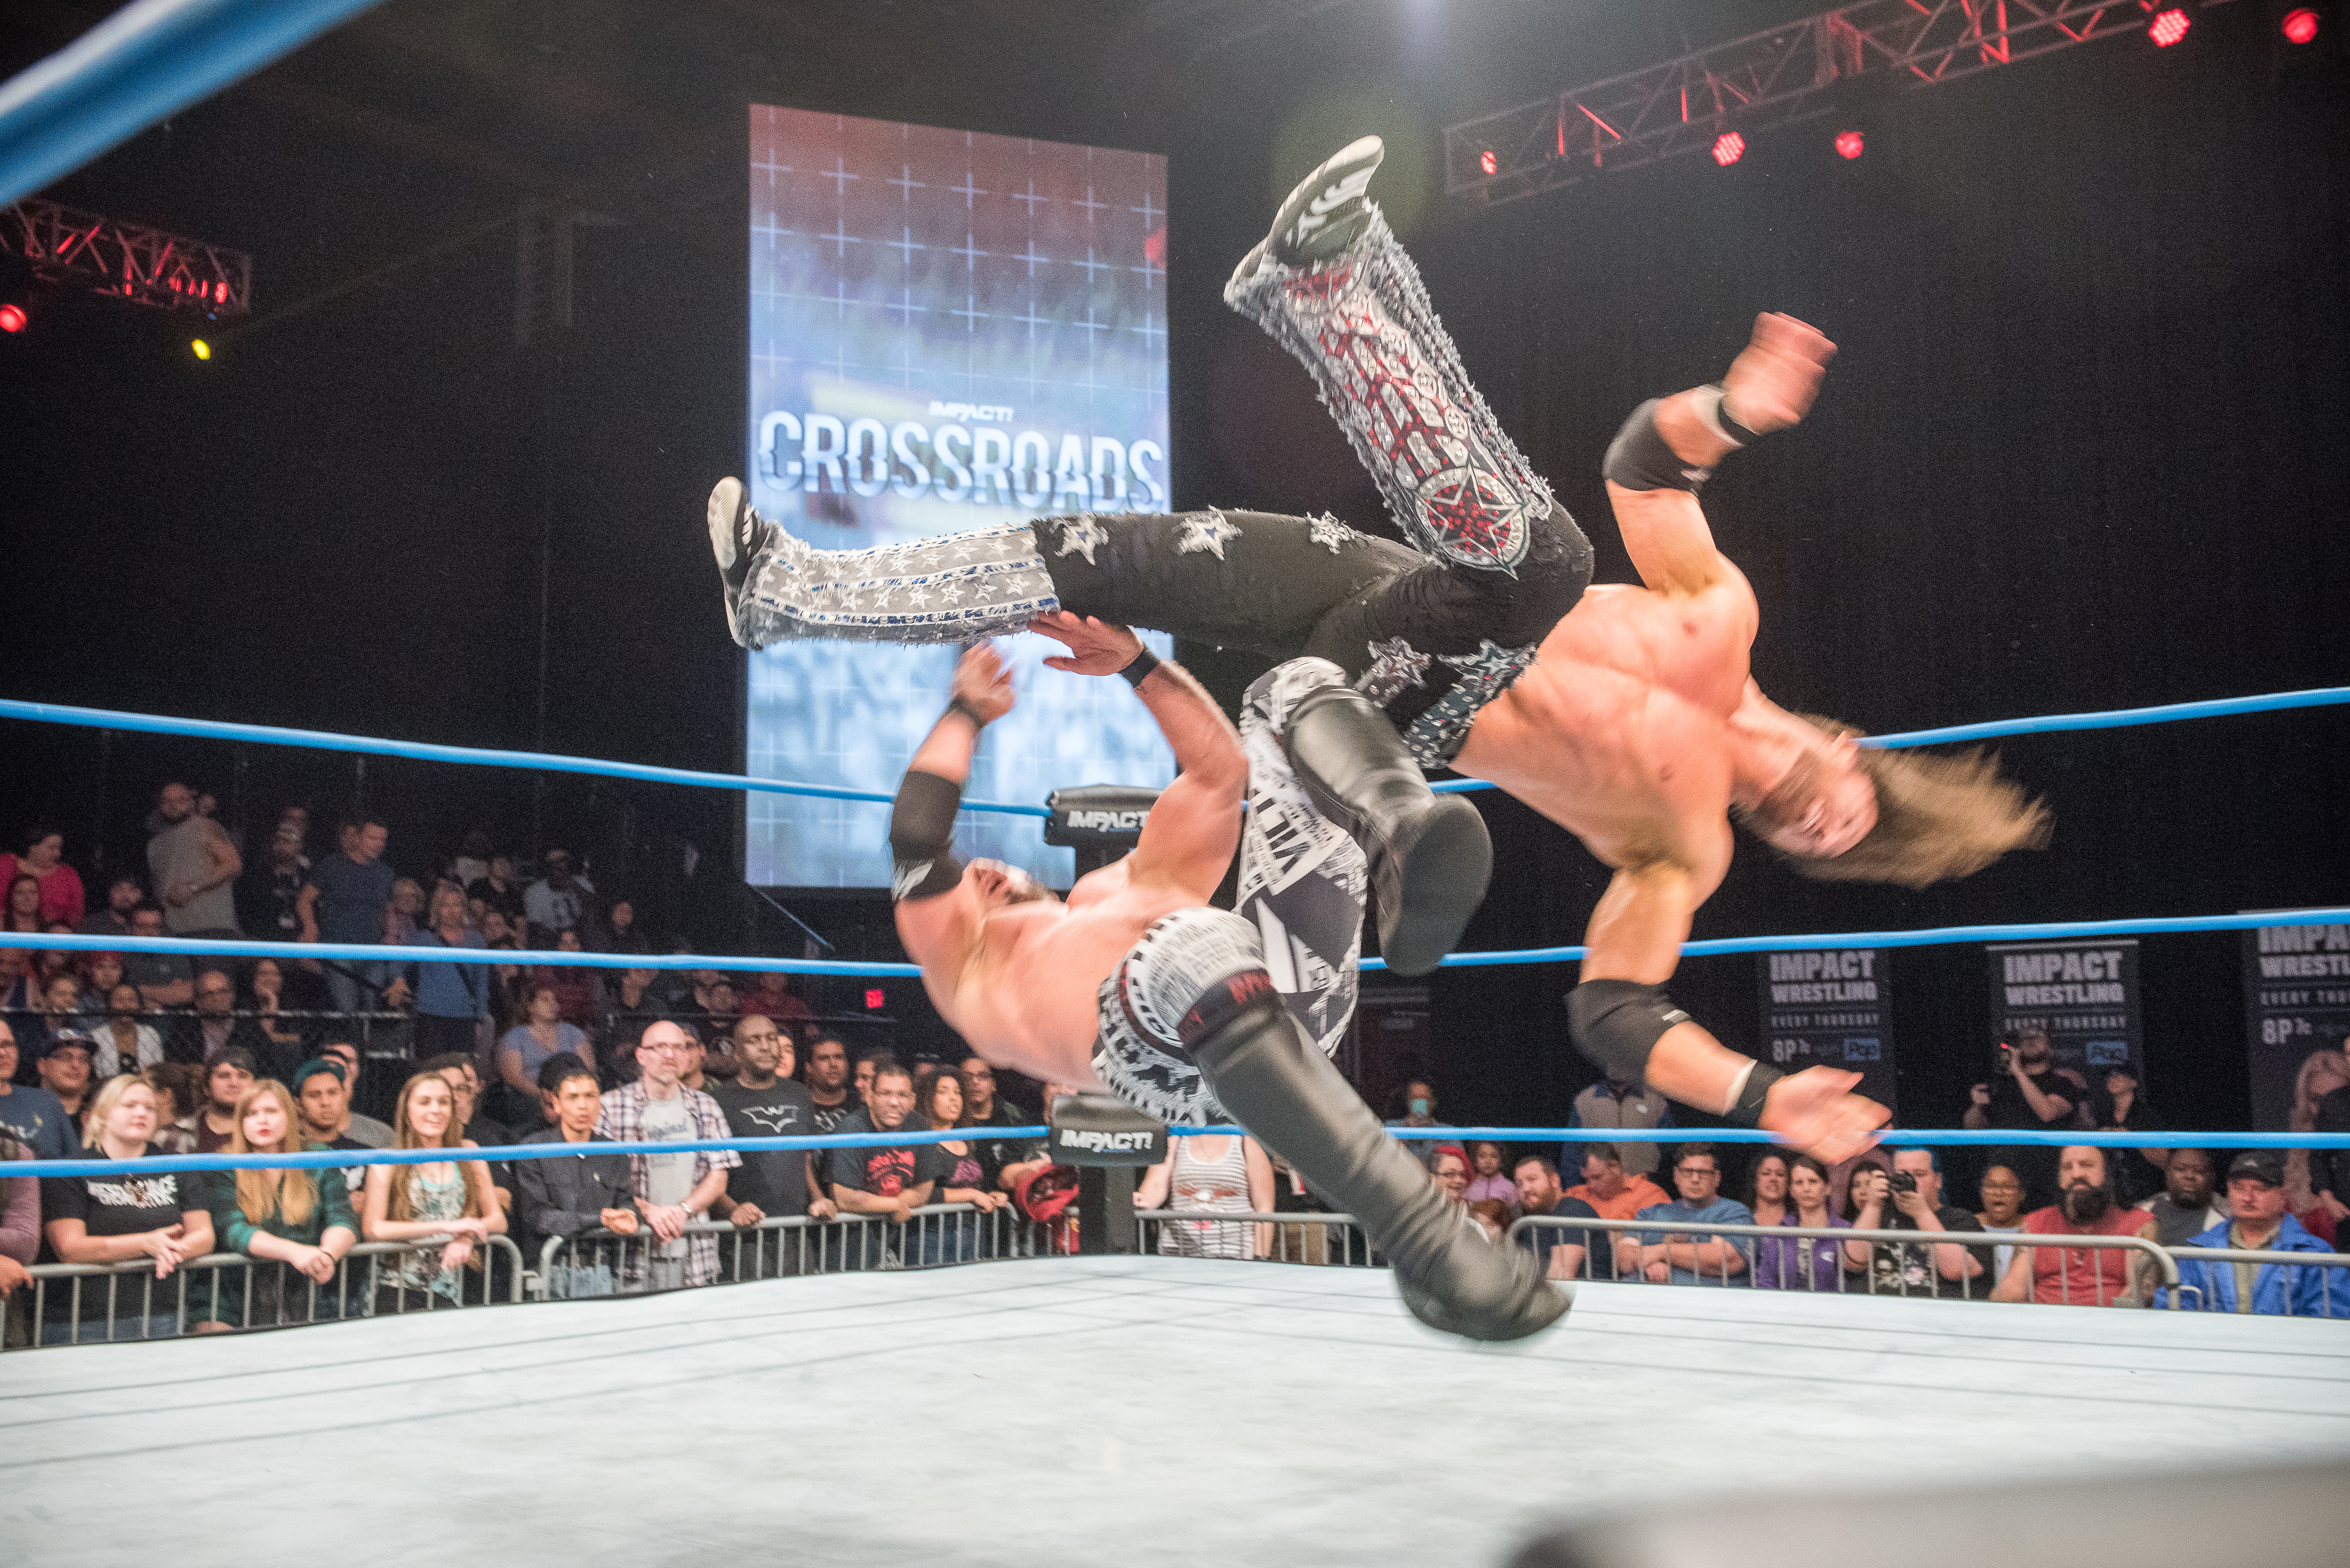 Johnny Impact Wins The Impact World Title As Austin Aries Bolts At Bound For Glory